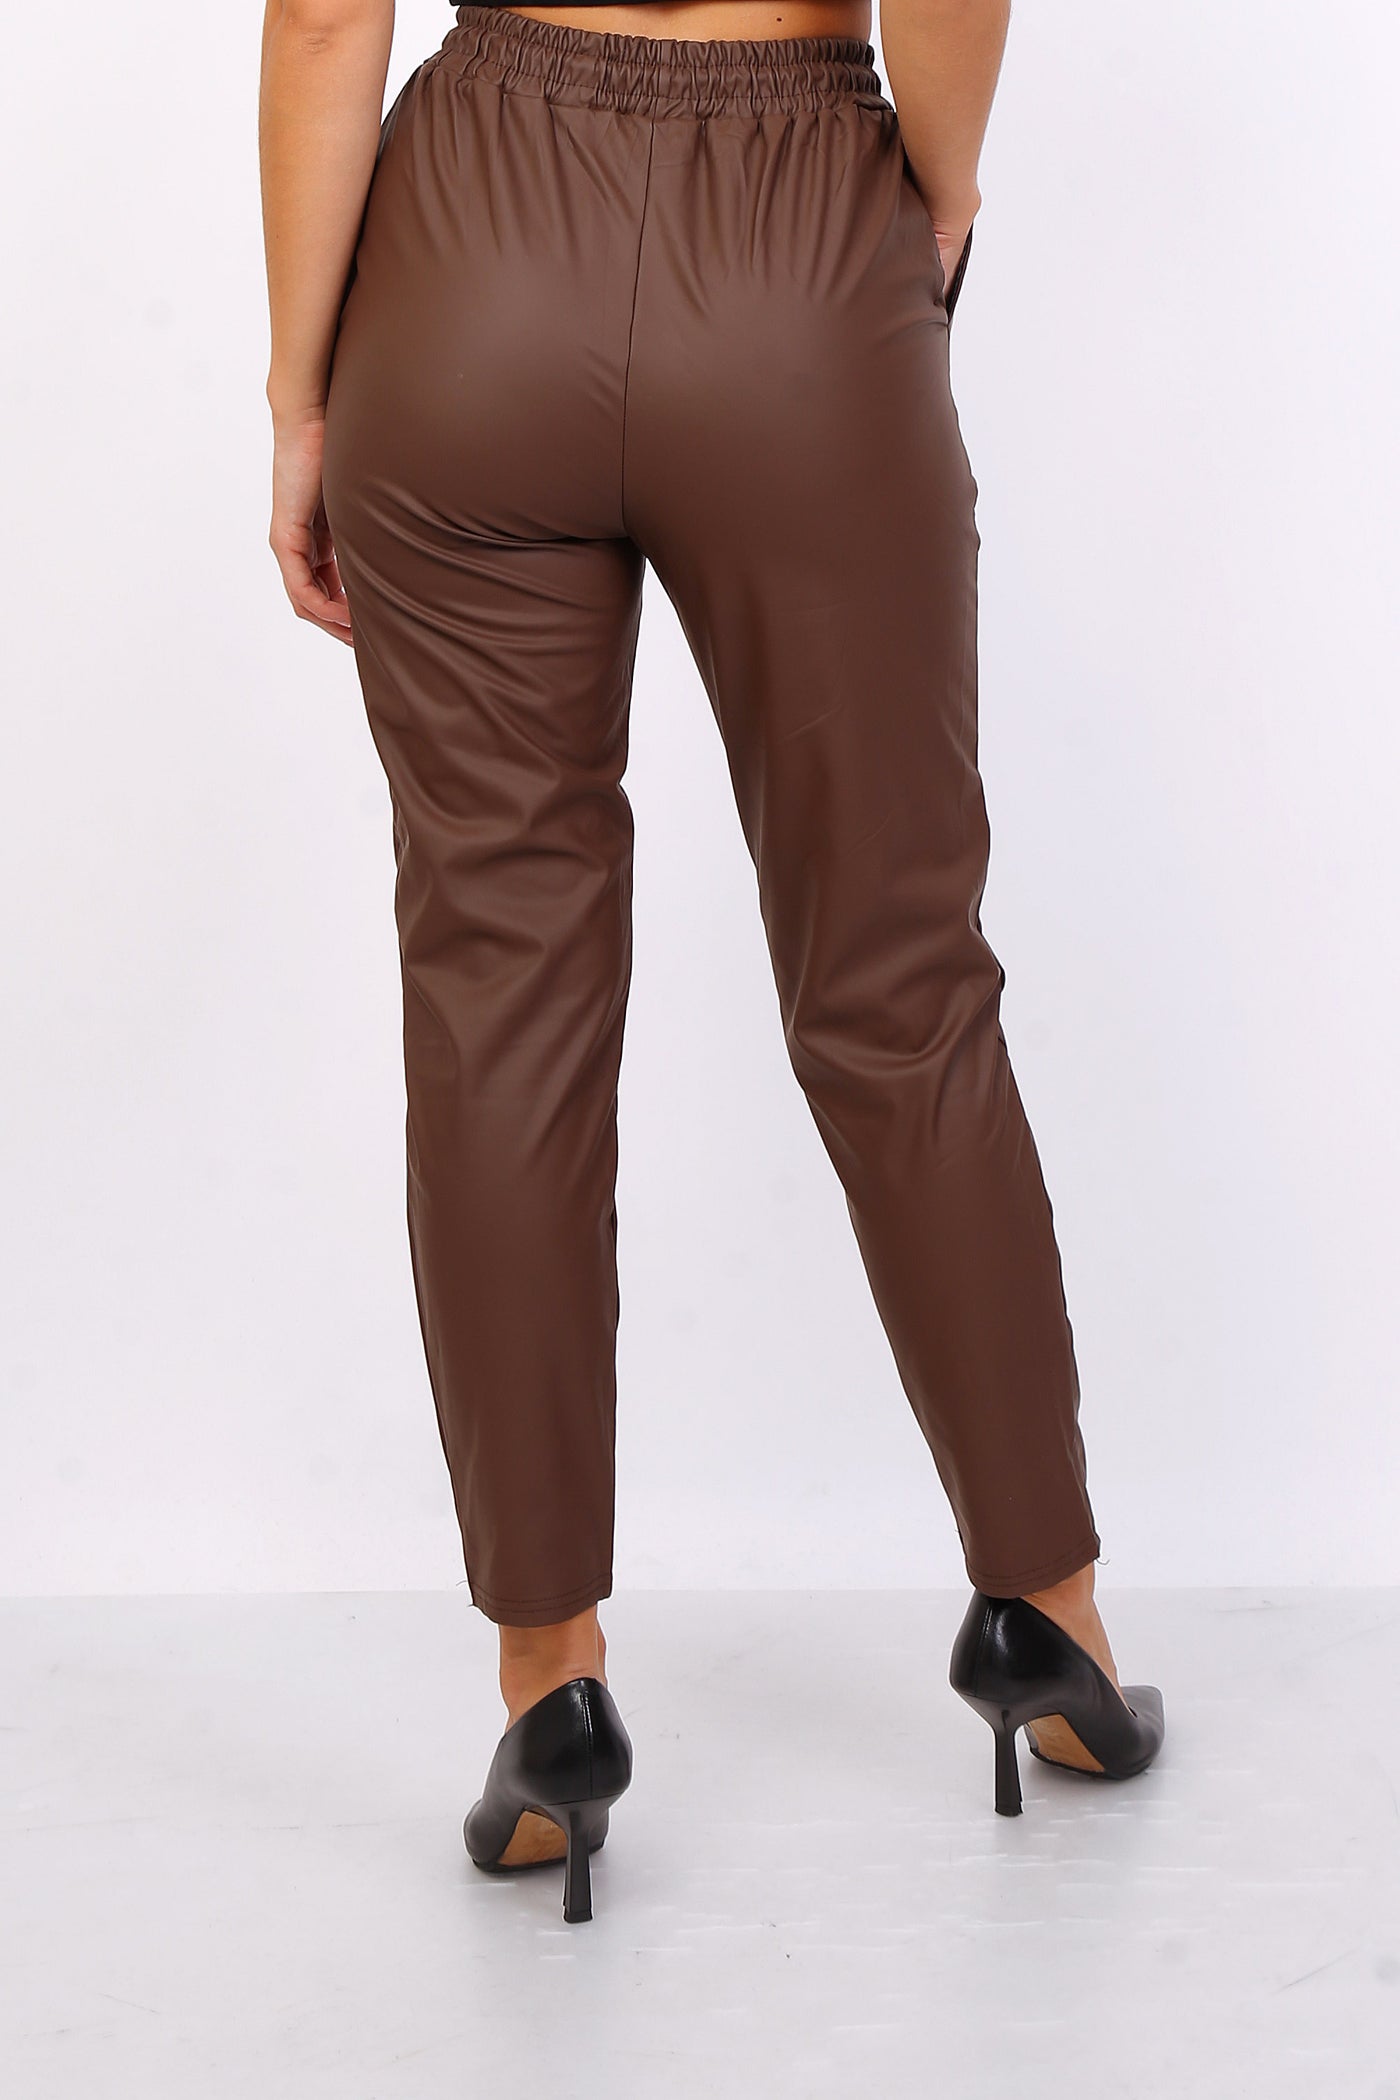 Cleo Cropped Straight Leg Leather Look Trousers in Brown